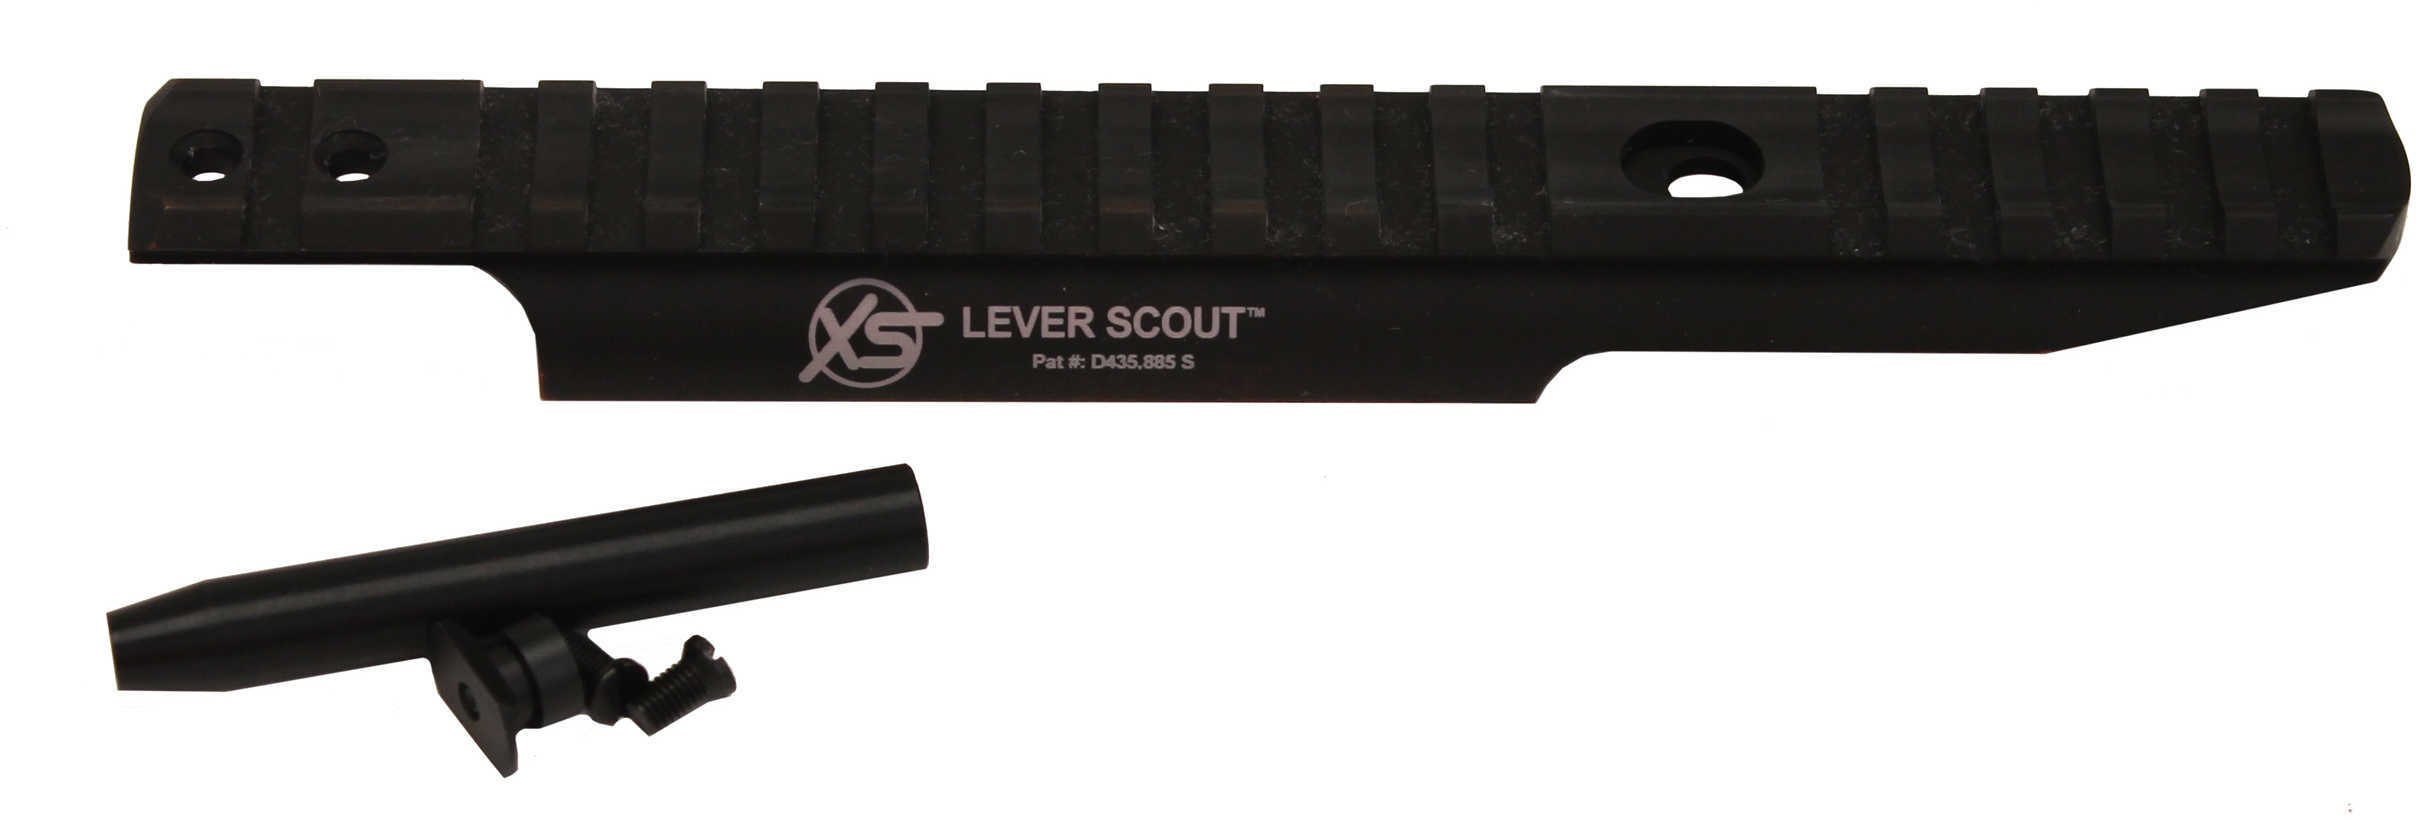 XS Scout Mount For Marlin 336/308MX W/Round Barrel